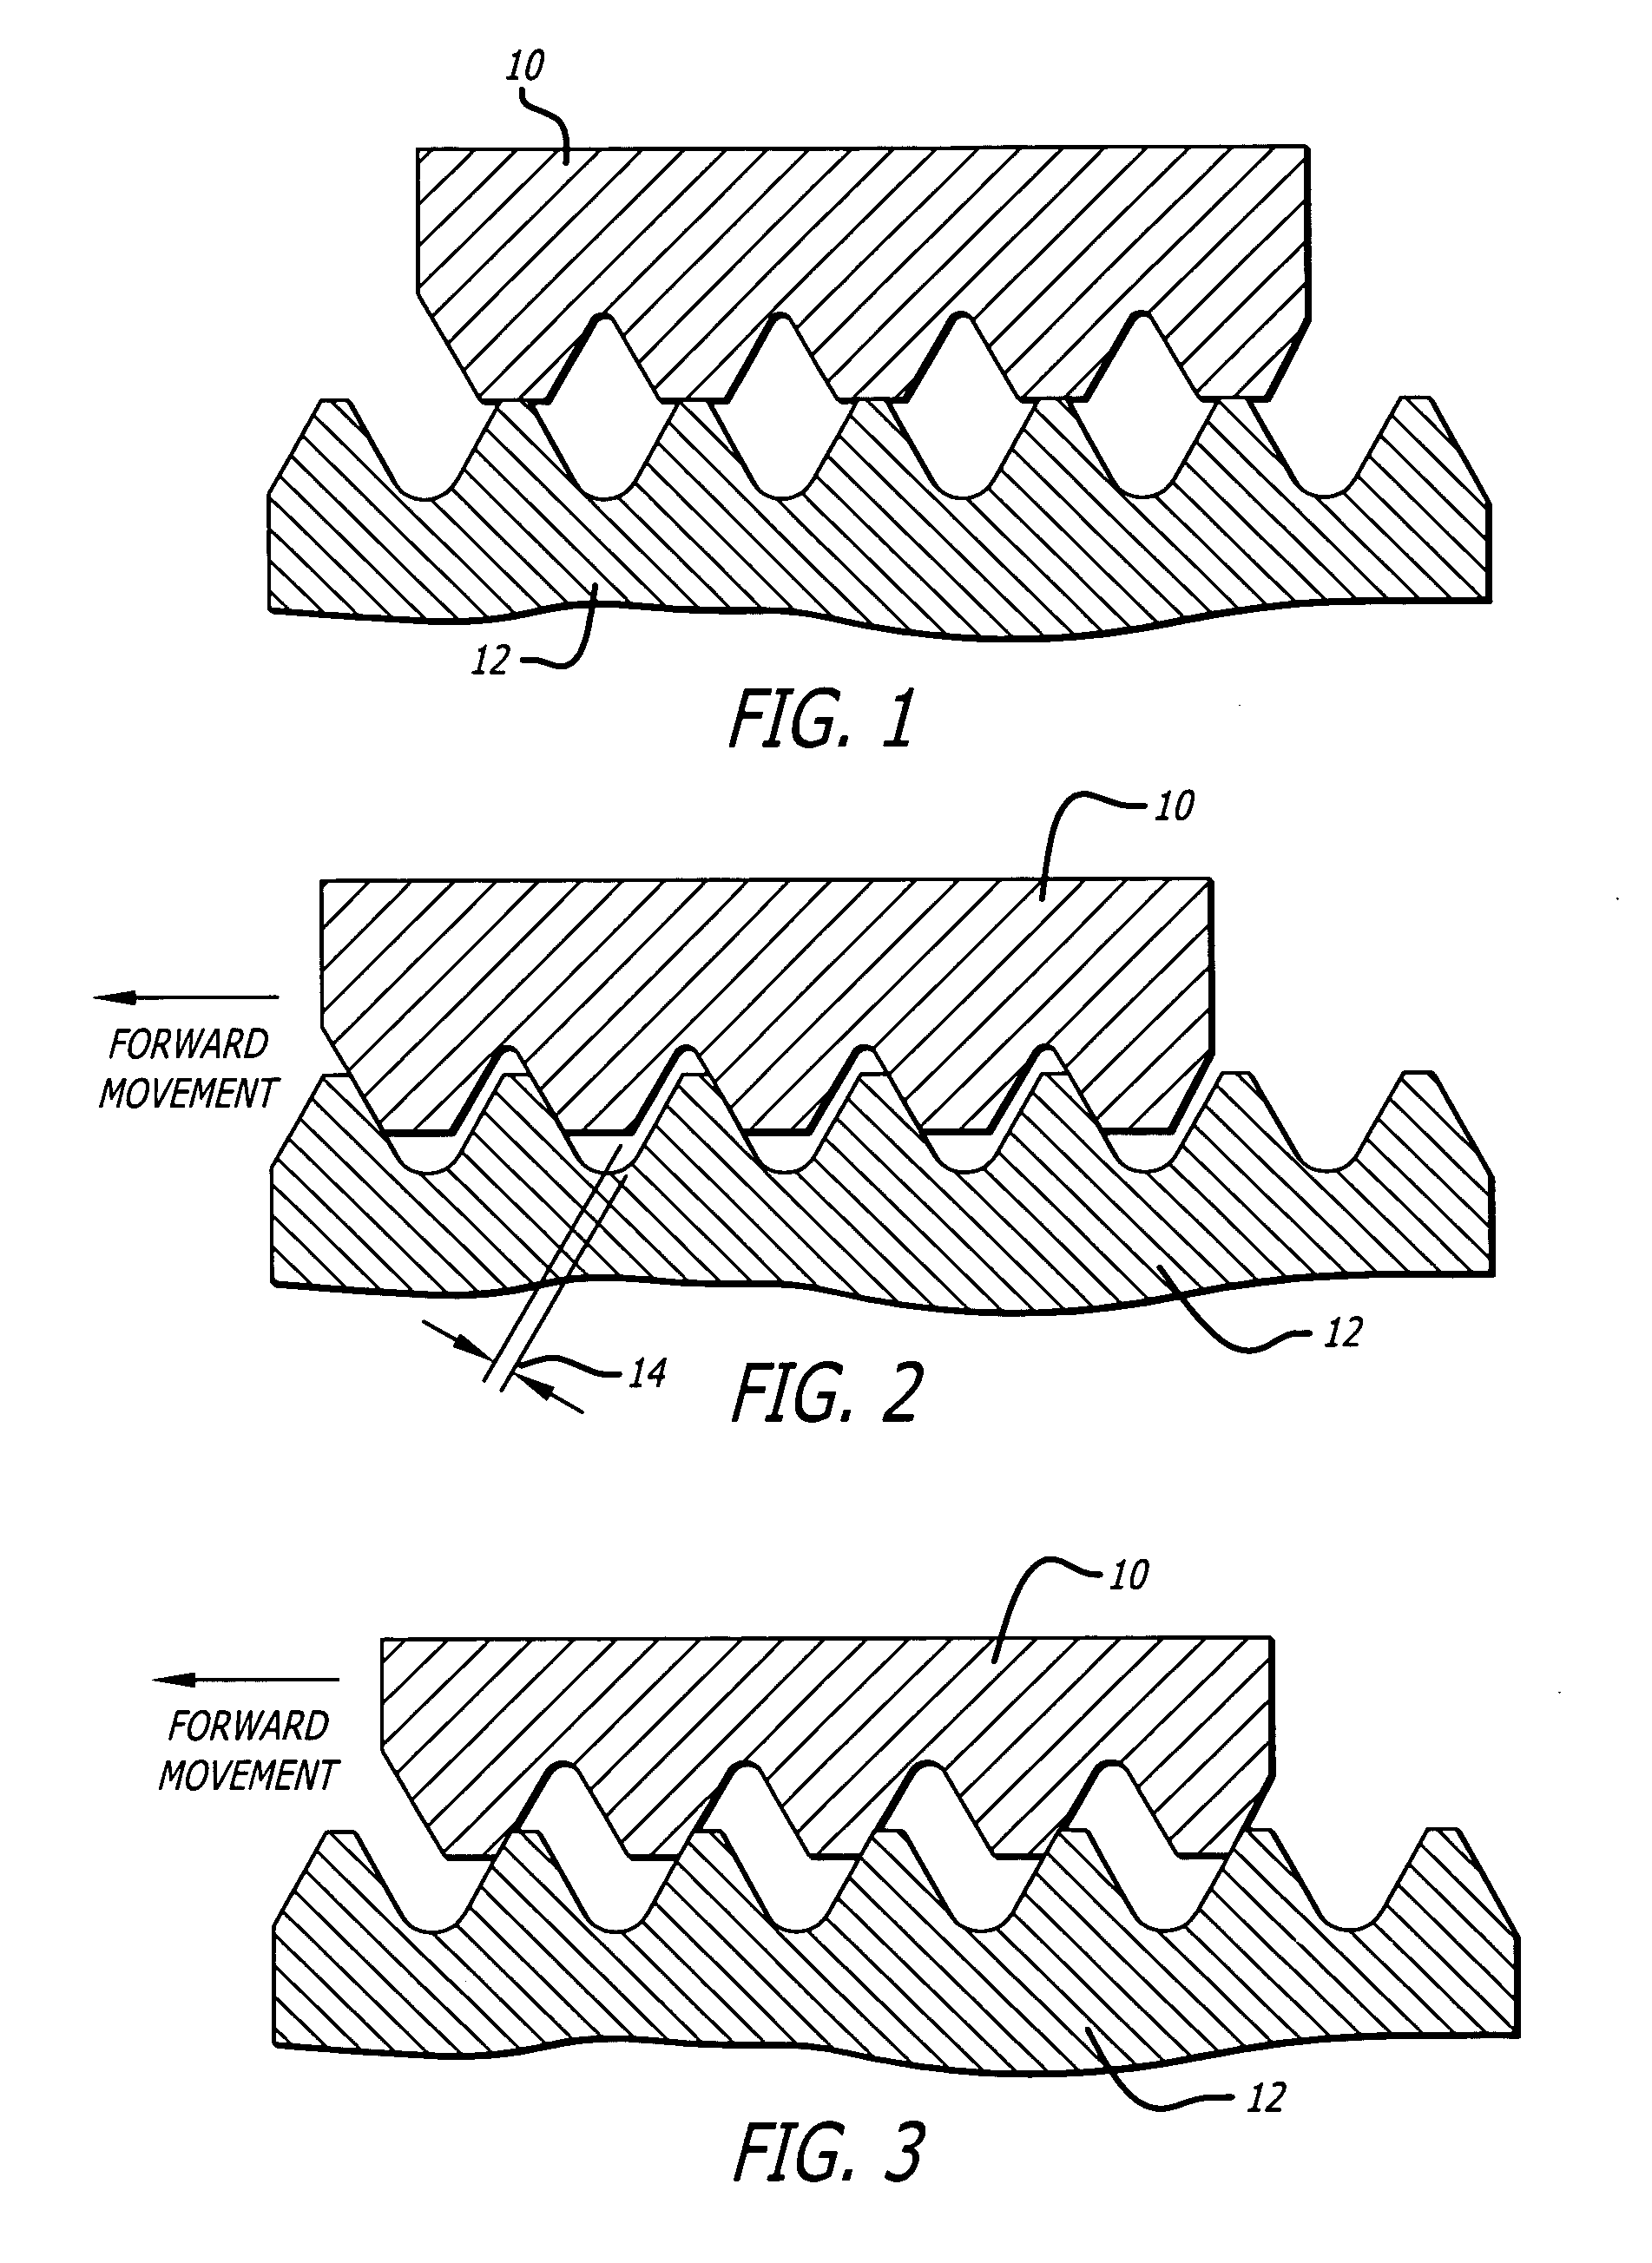 Dynamic lead screw thread engagement system and method